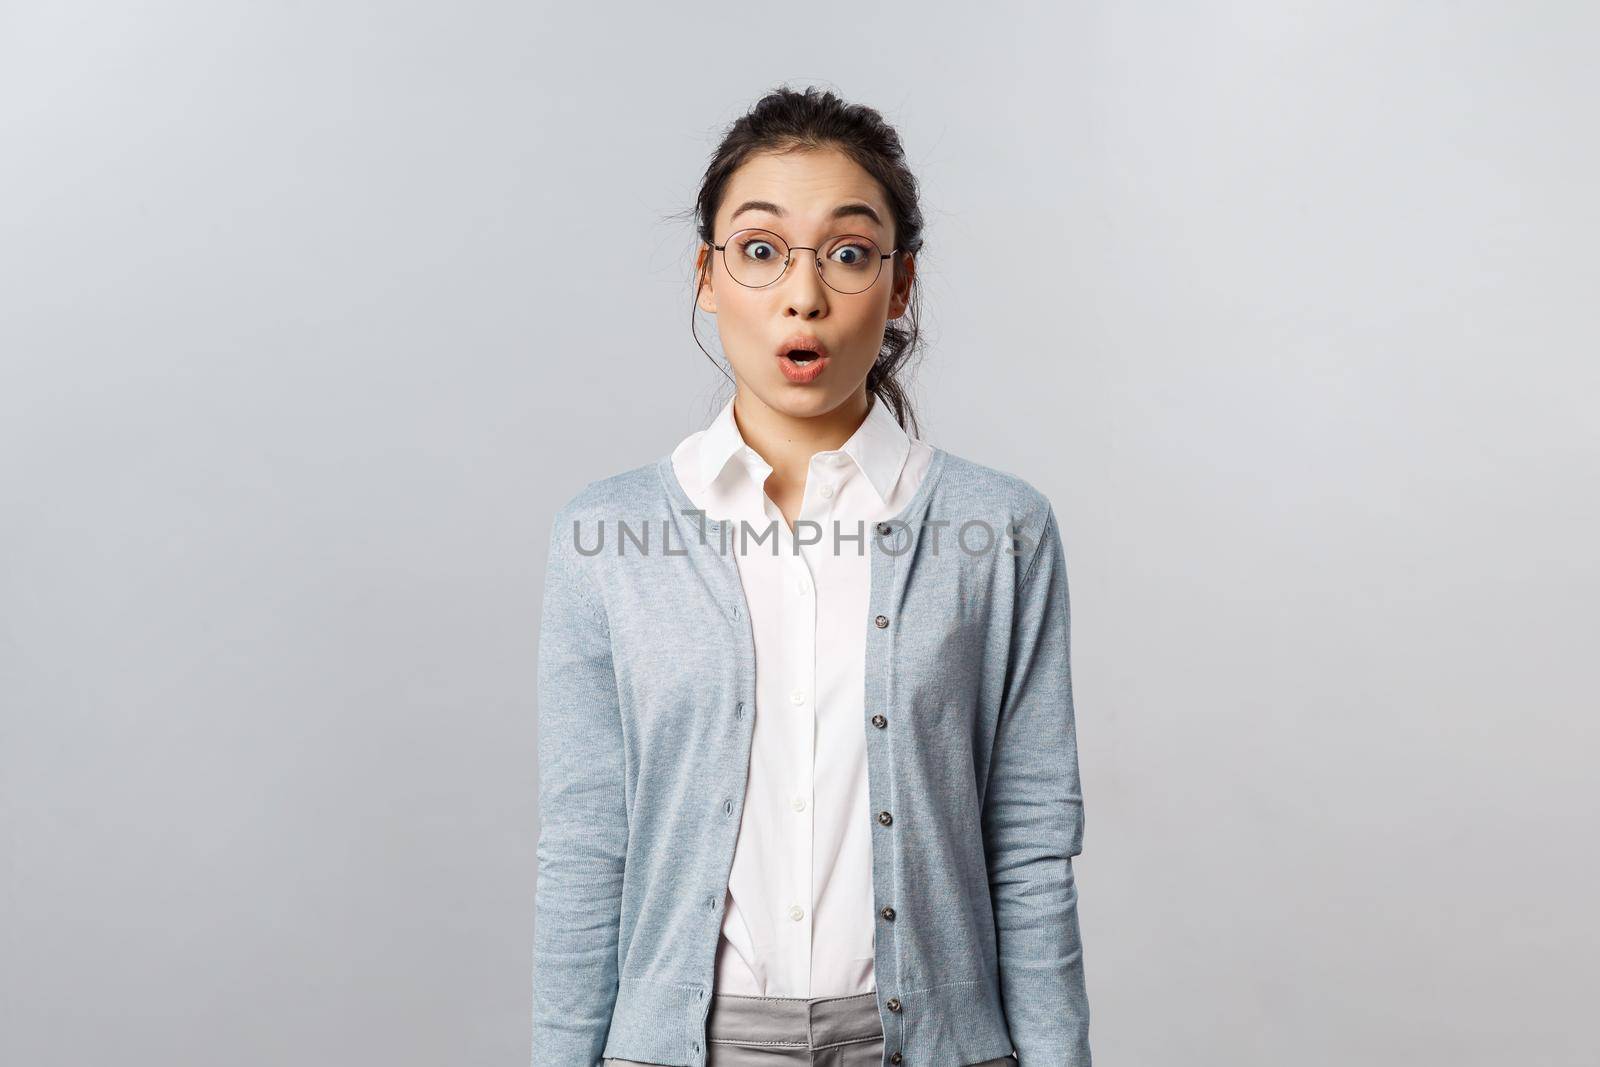 Lifestyle, people and emotions concept. Shocked, startled young asian impressed woman, stare with surprise and awe at something incredible, open mouth gasping astounded, grey background.